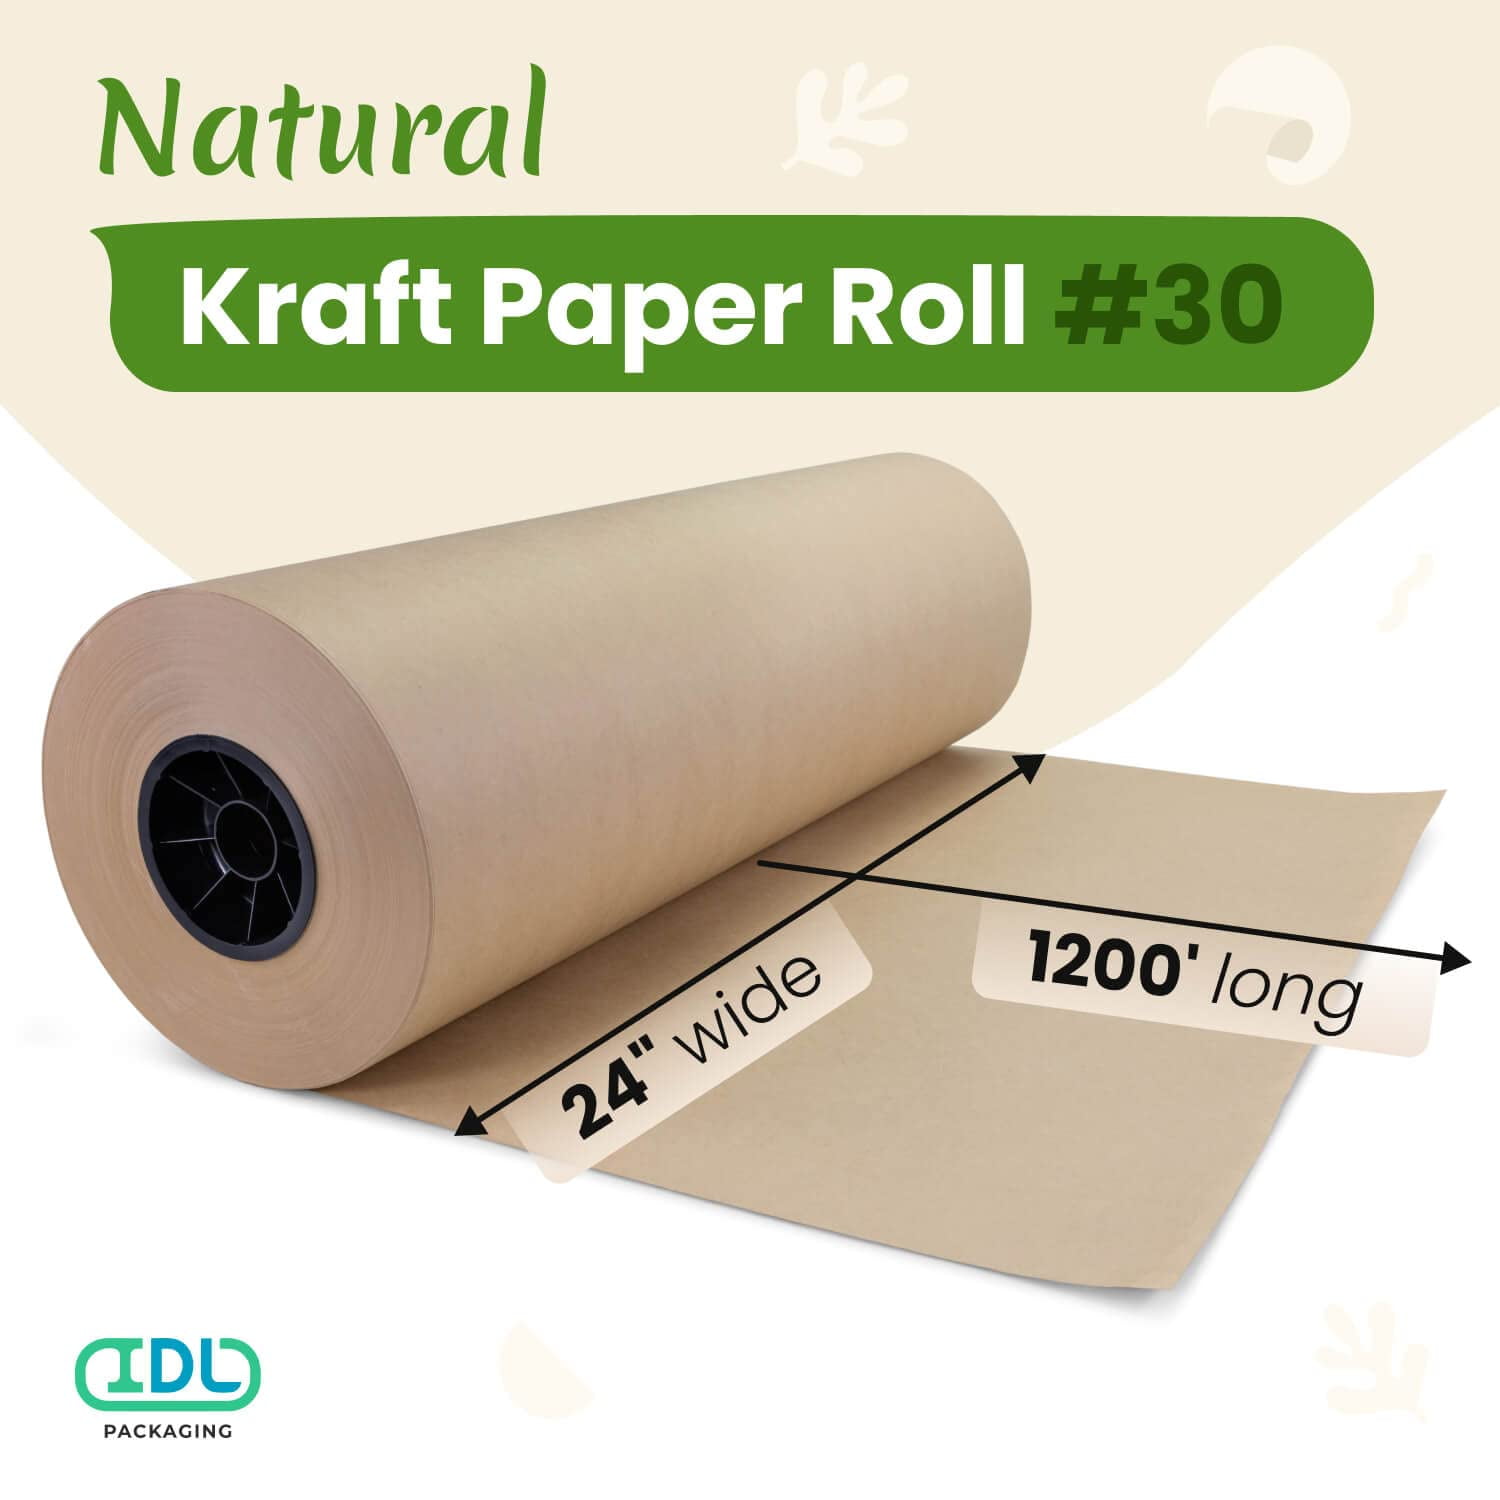 Wax Coated Packing Paper, Capacity: 1200